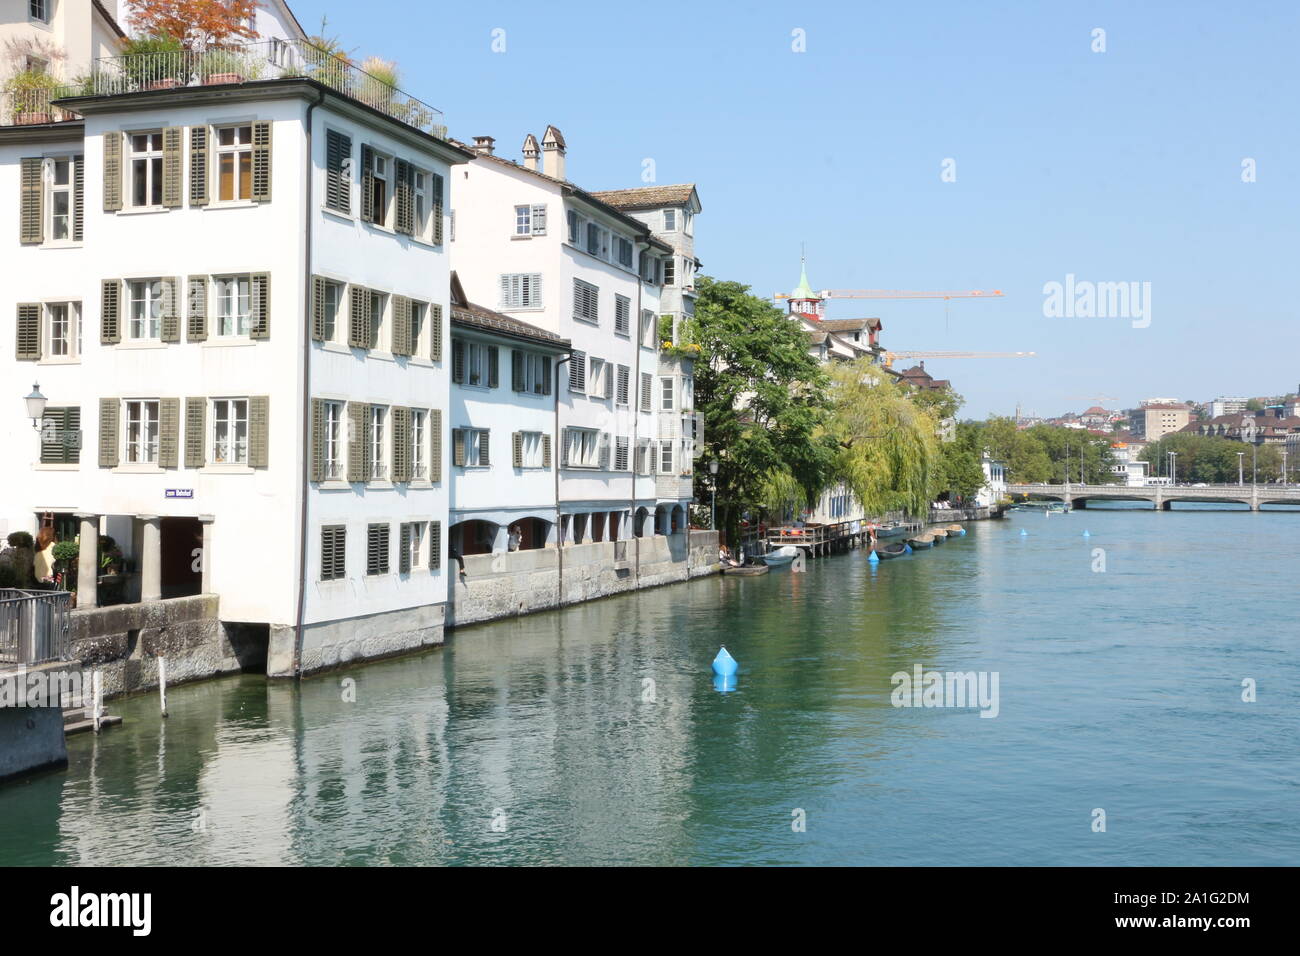 Stadt Von Zürich High Resolution Stock Photography and Images - Alamy